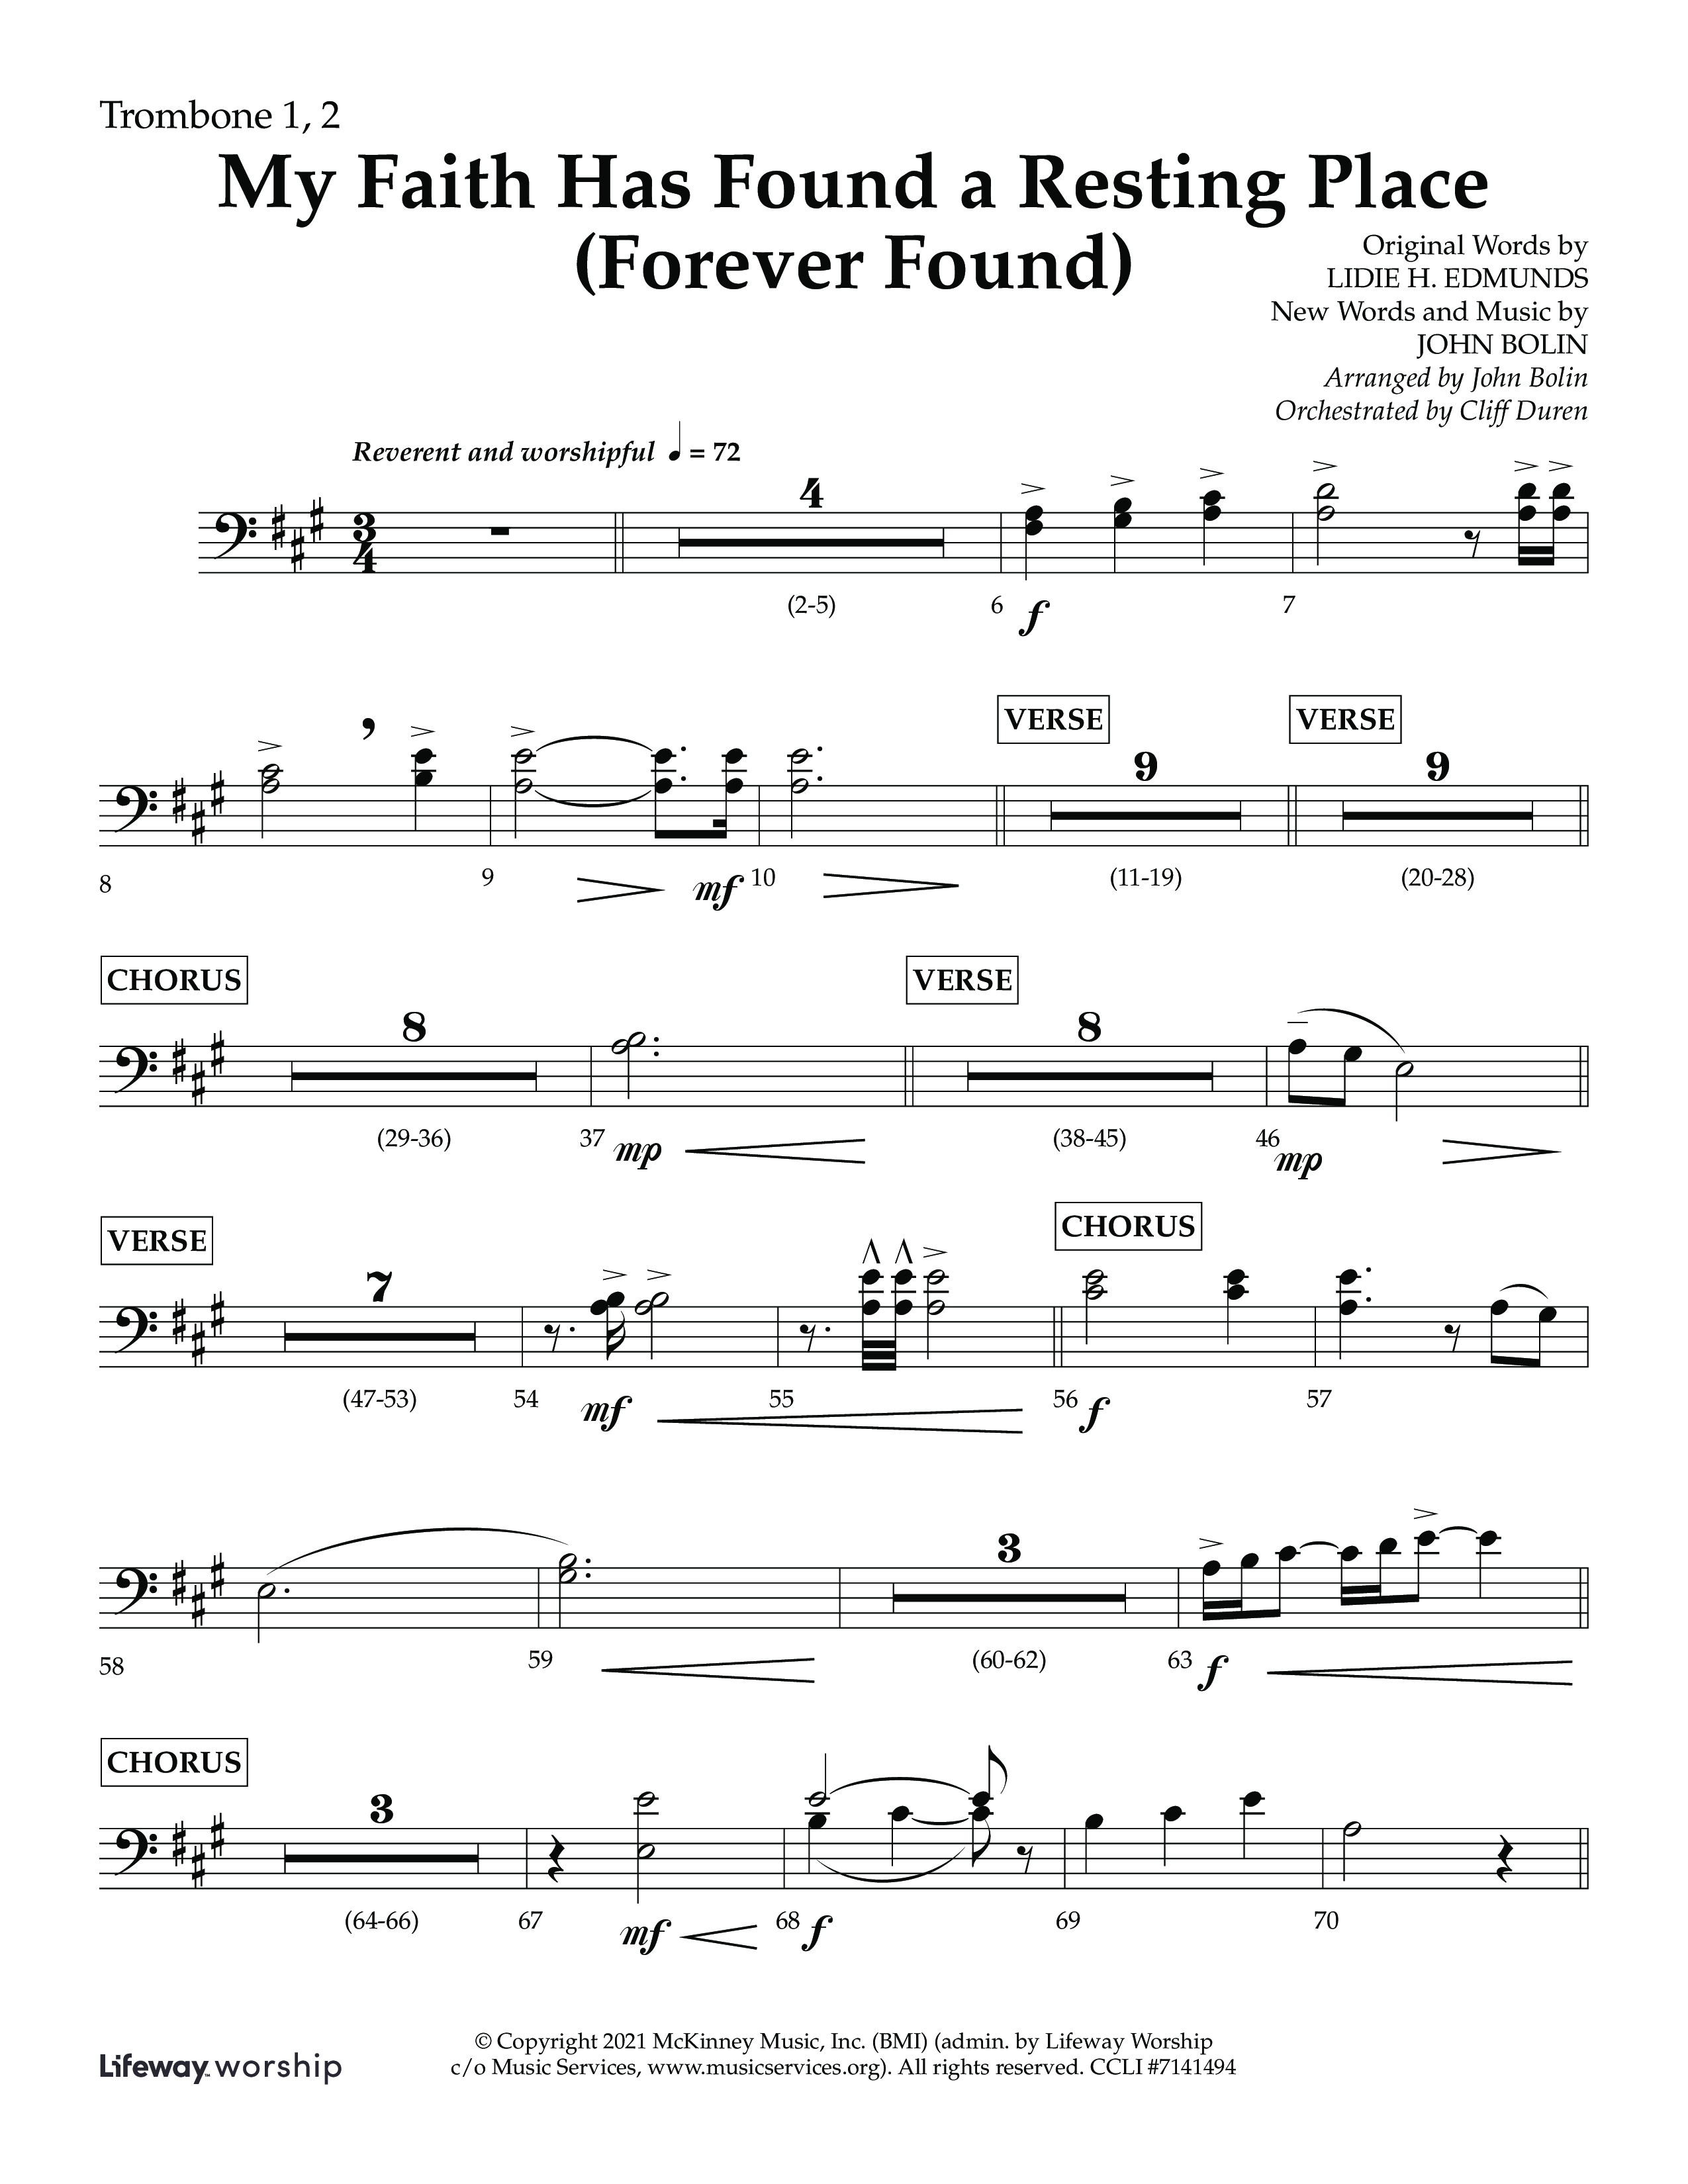 My Faith Has Found a Resting Place (Forever Found) (Choral Anthem SATB) Trombone 1/2 (Lifeway Choral / Arr. John Bolin / Orch. Cliff Duren)